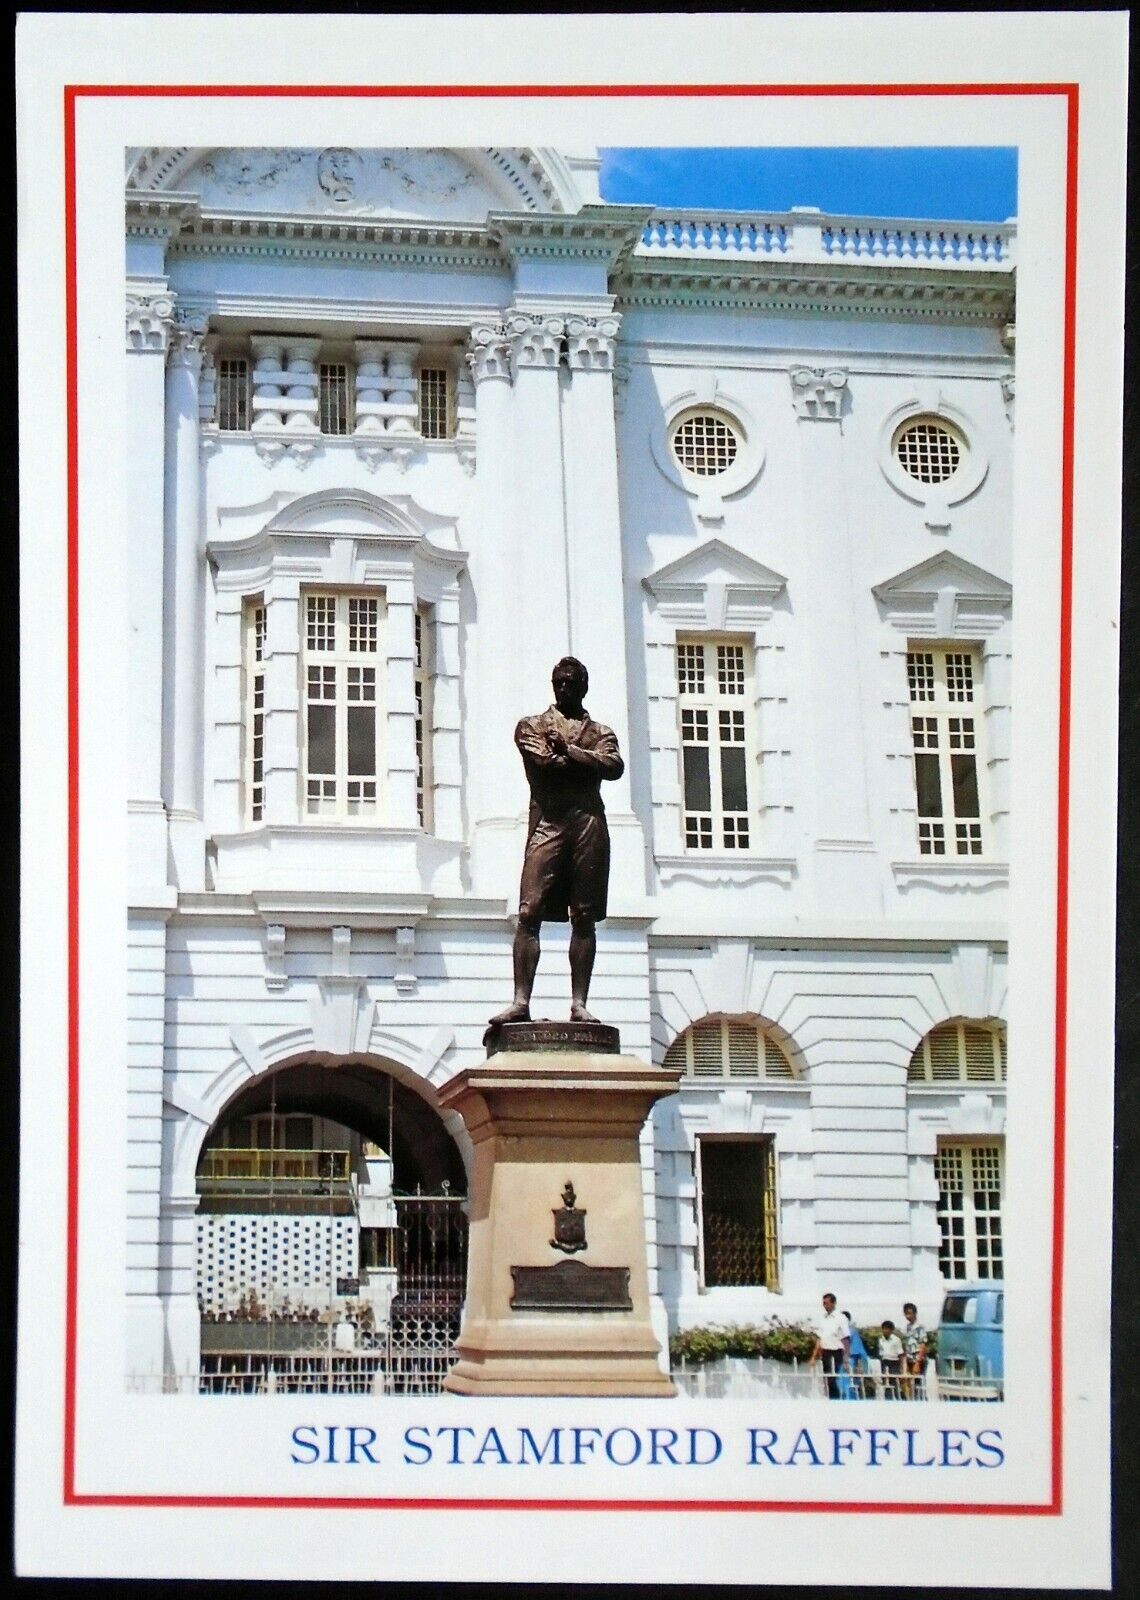 Statue of Sir Stamford Raffles, Front Victoria Memorial Hall, Founder Singapore